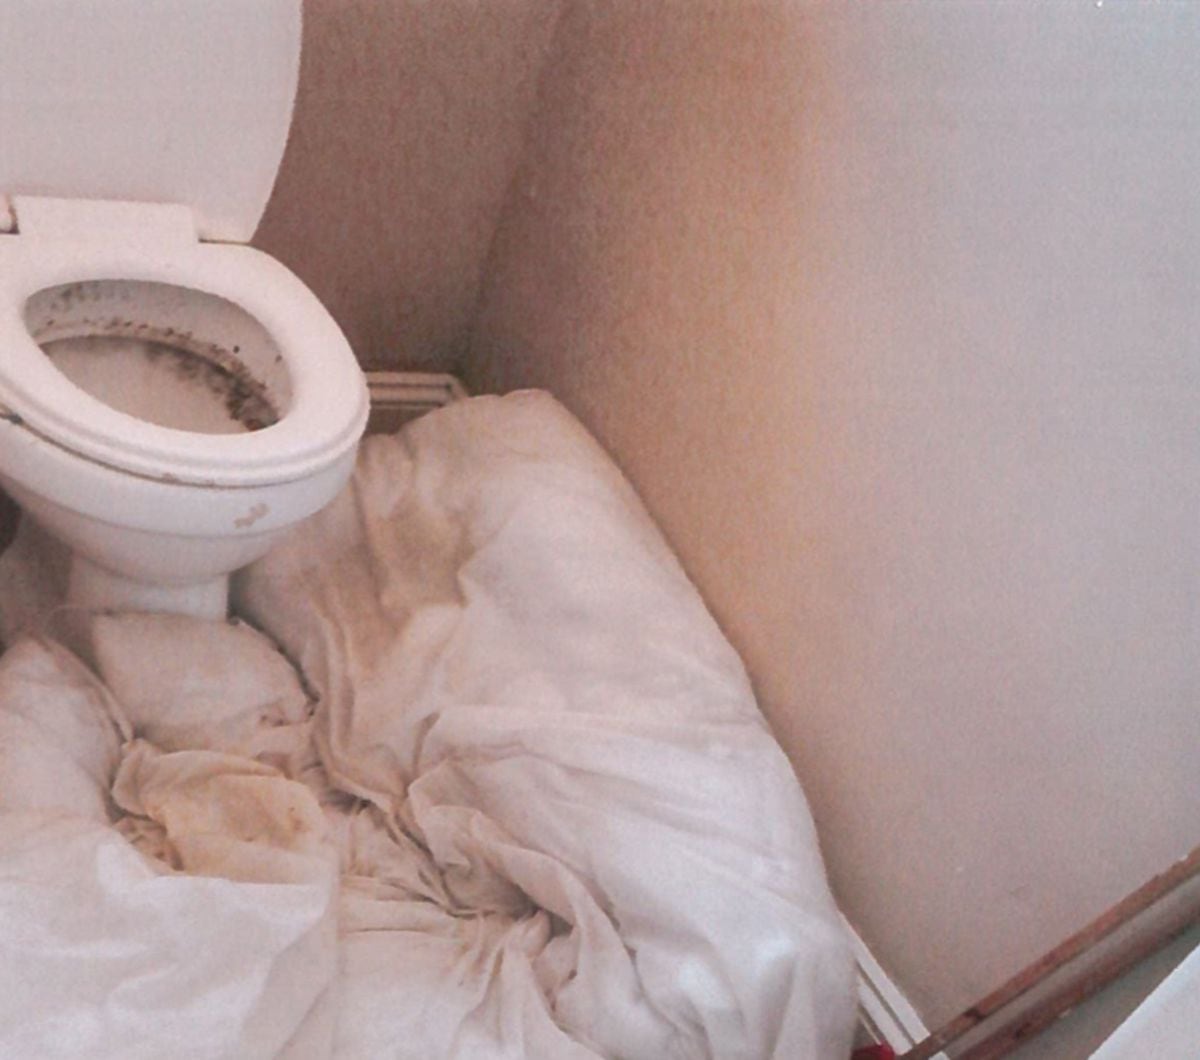 A leaky toilet which had to be plugged by the trafficked tenants, with an old duvet